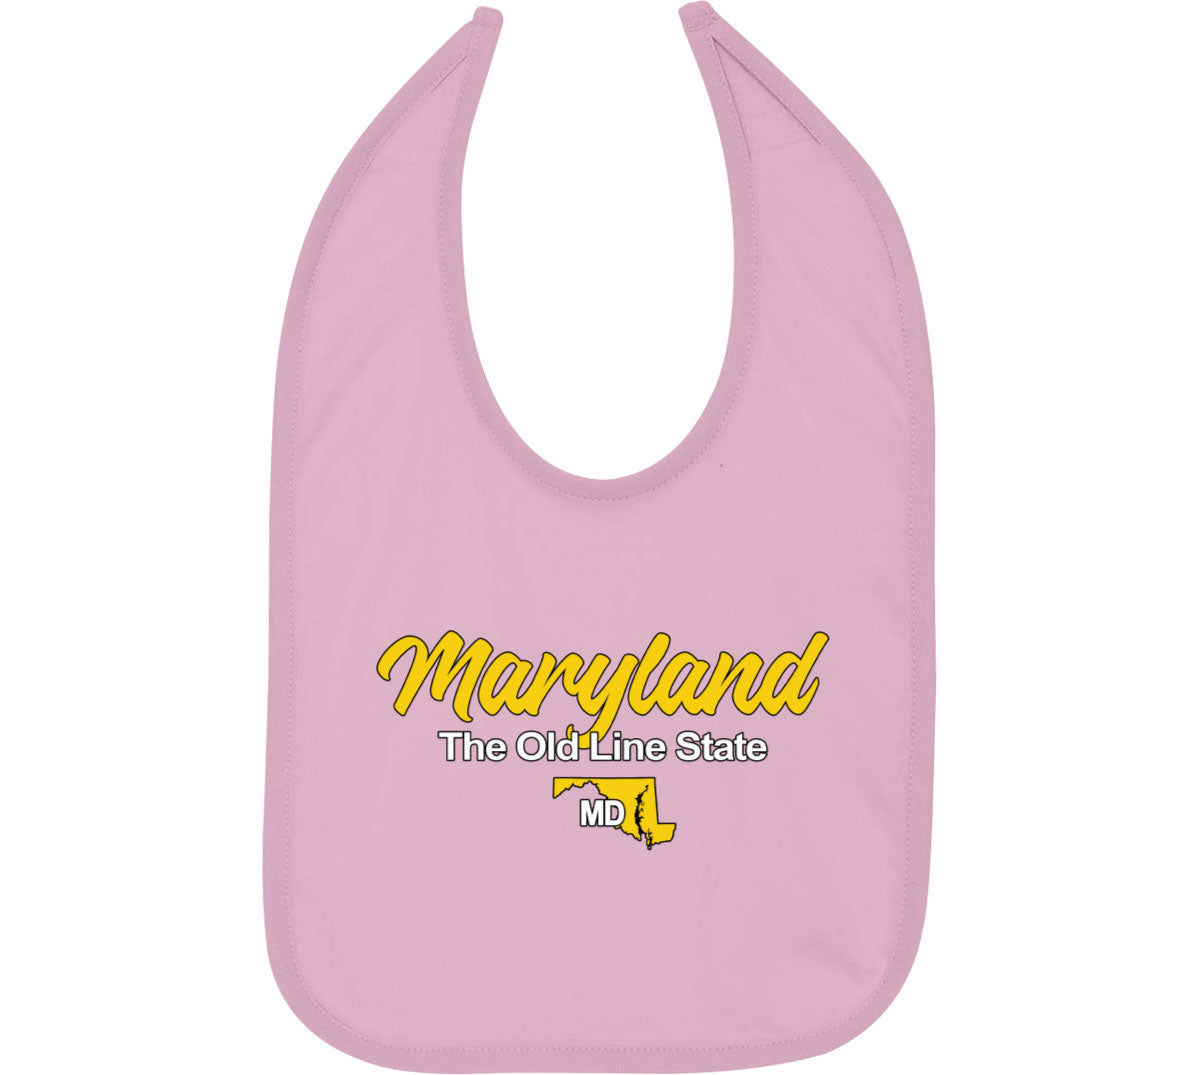 Maryland The Old Line State Baby Bib